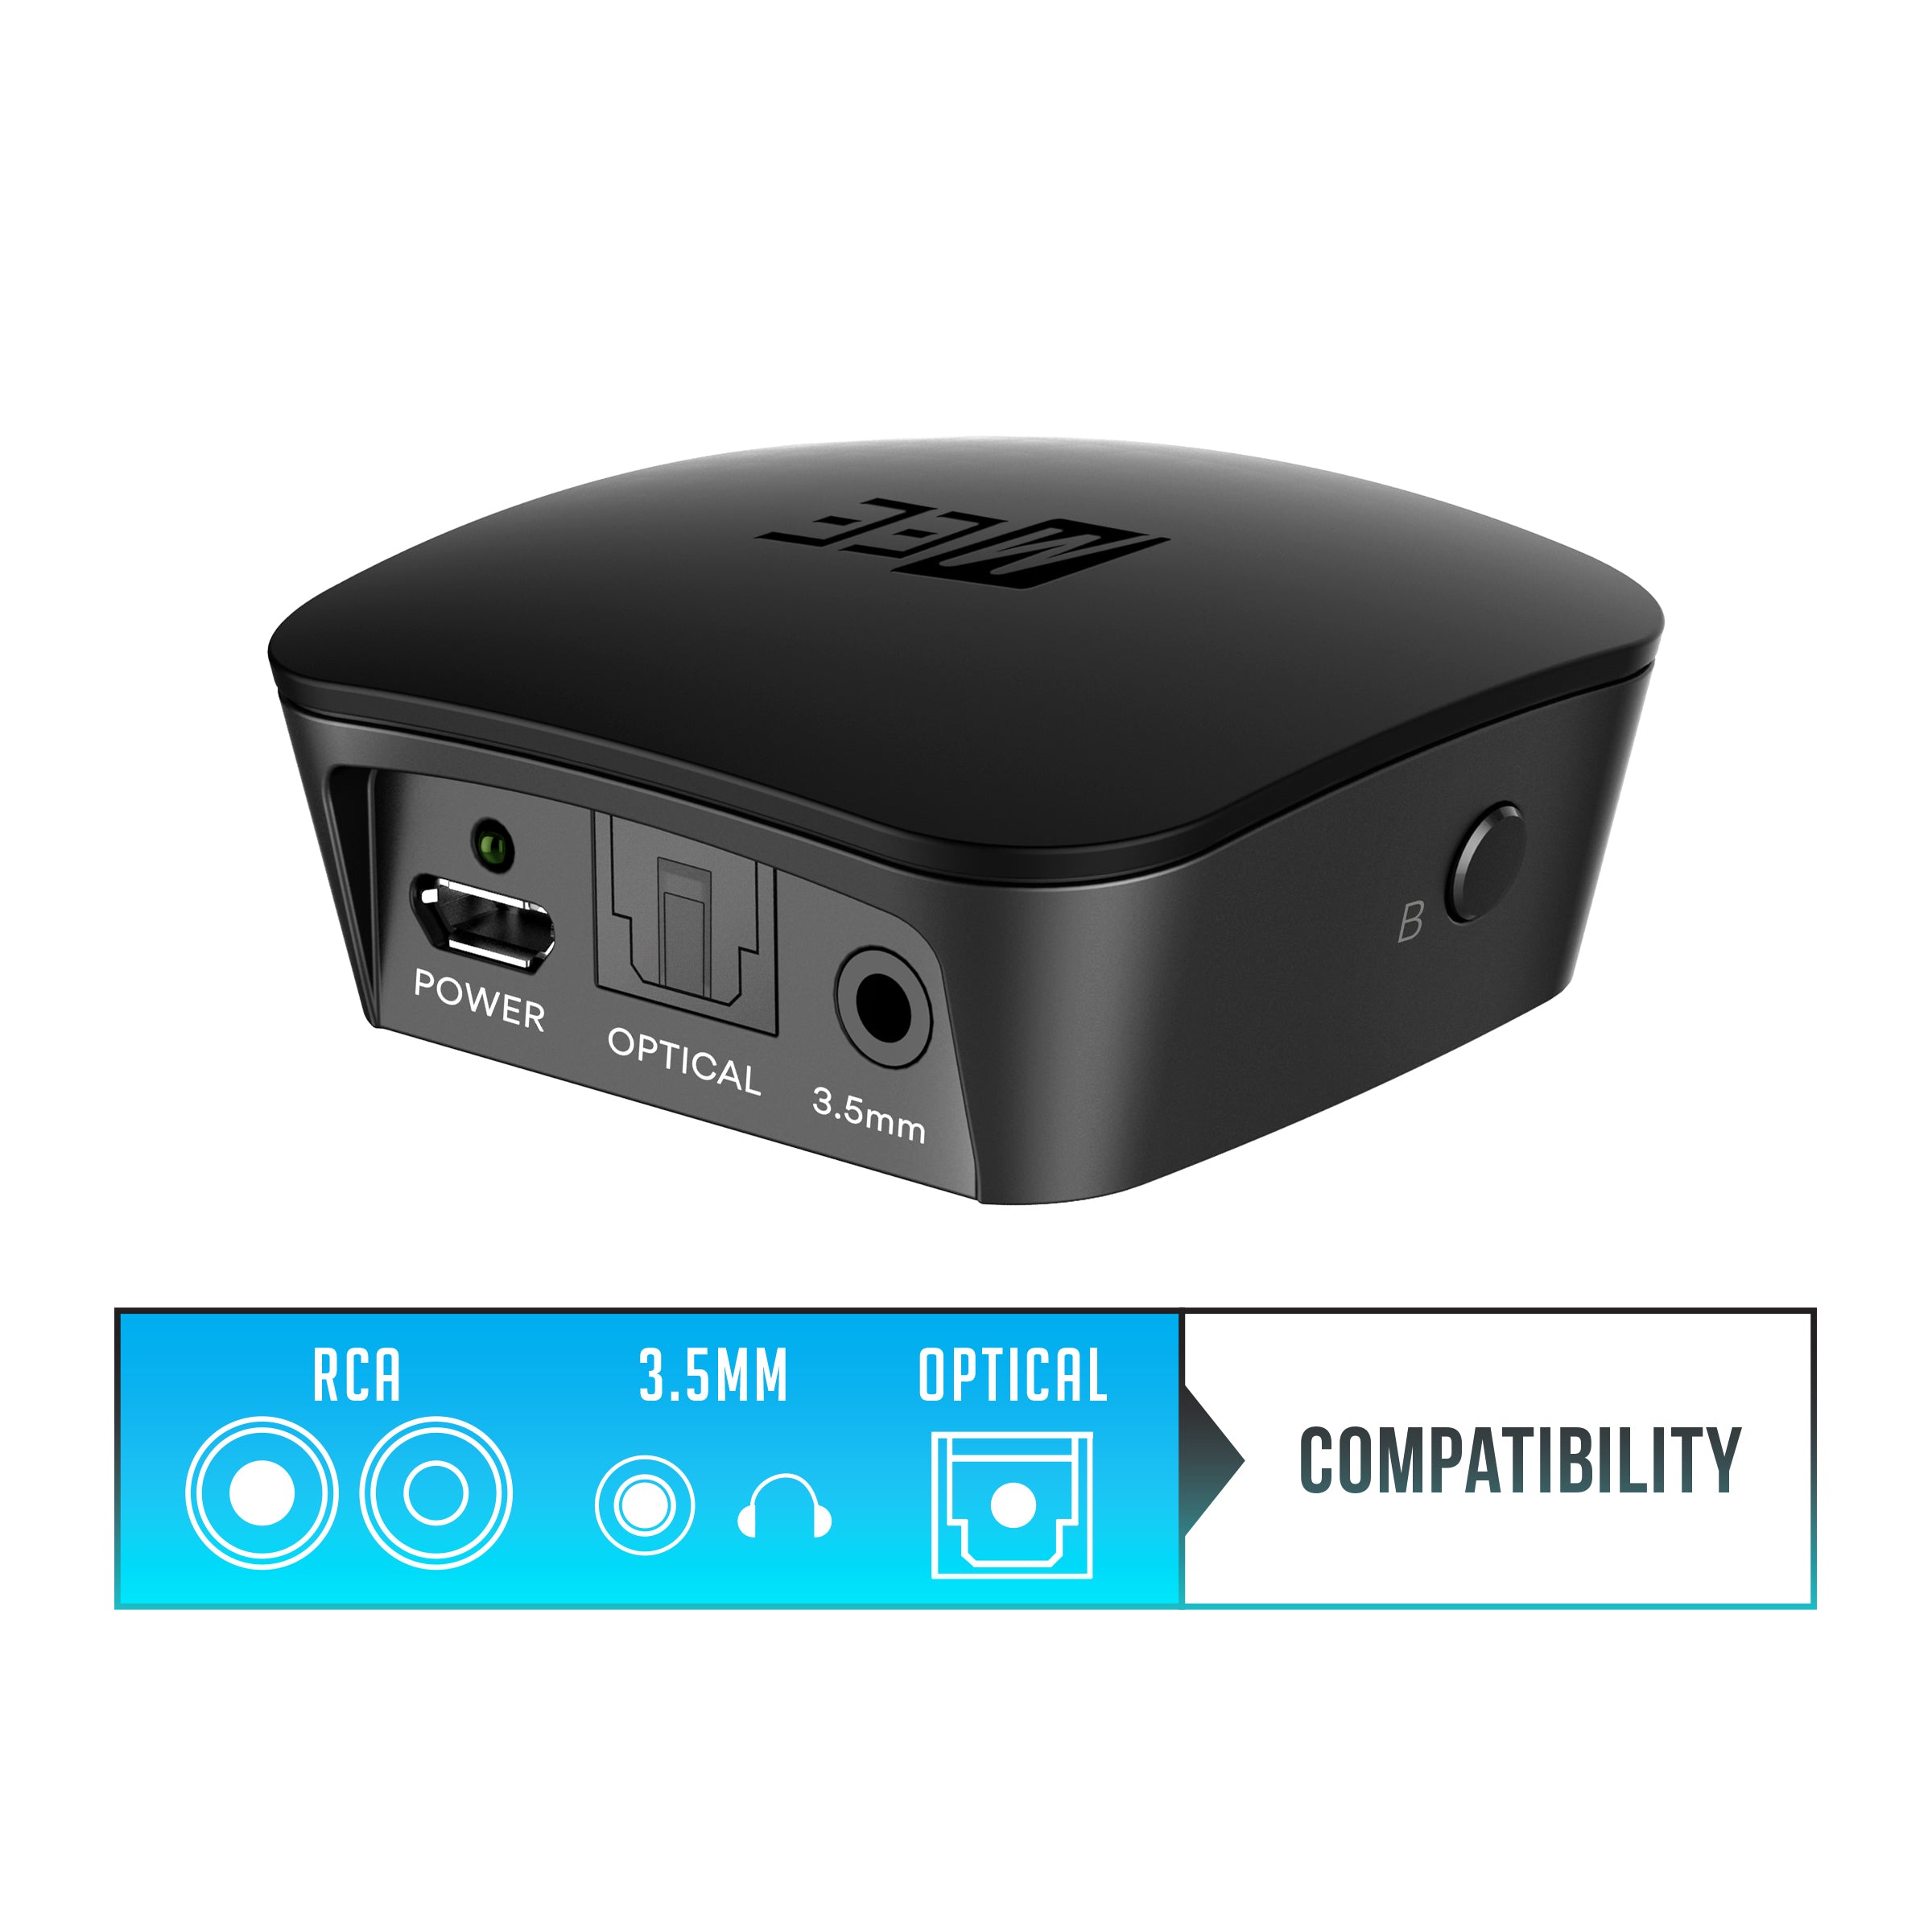 Black wireless audio transmitter with power, optical, and 3.5 mm inputs displayed on its side, along with rca, 3.5mm, and optical compatibility icons below.